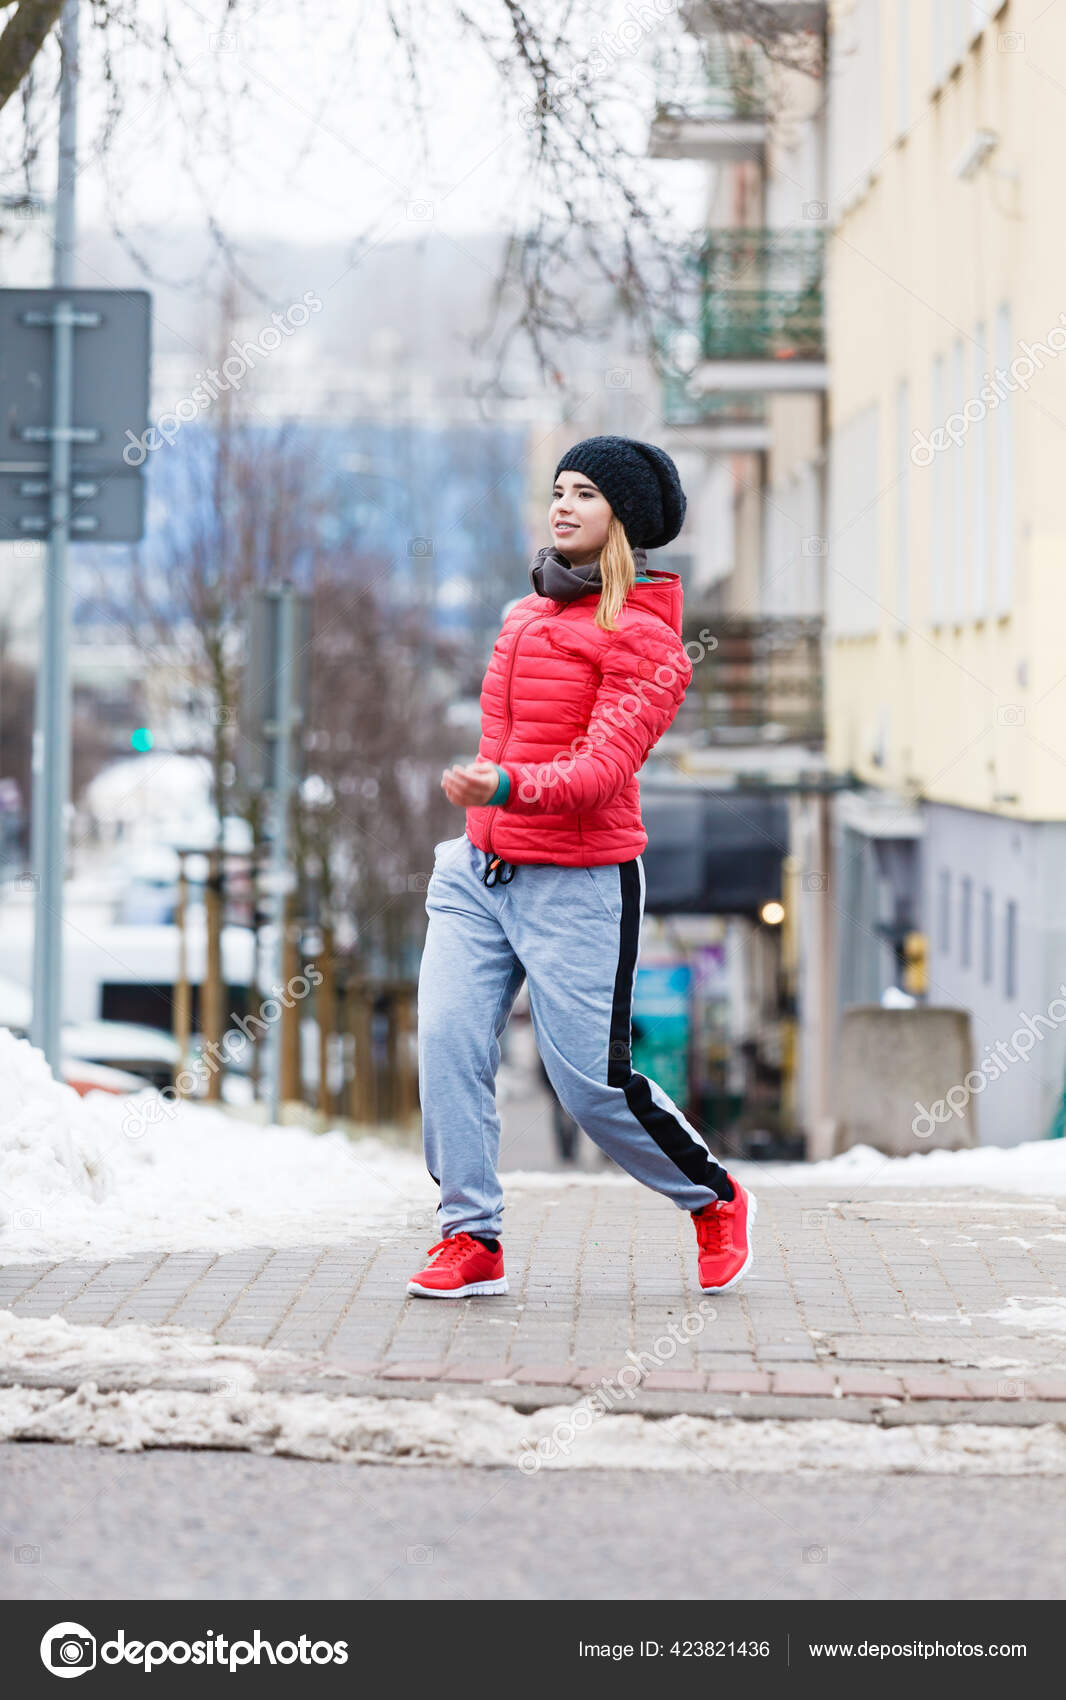 Outdoor Sport Exercises Sporty Outfit Ideas Woman Wearing Warm